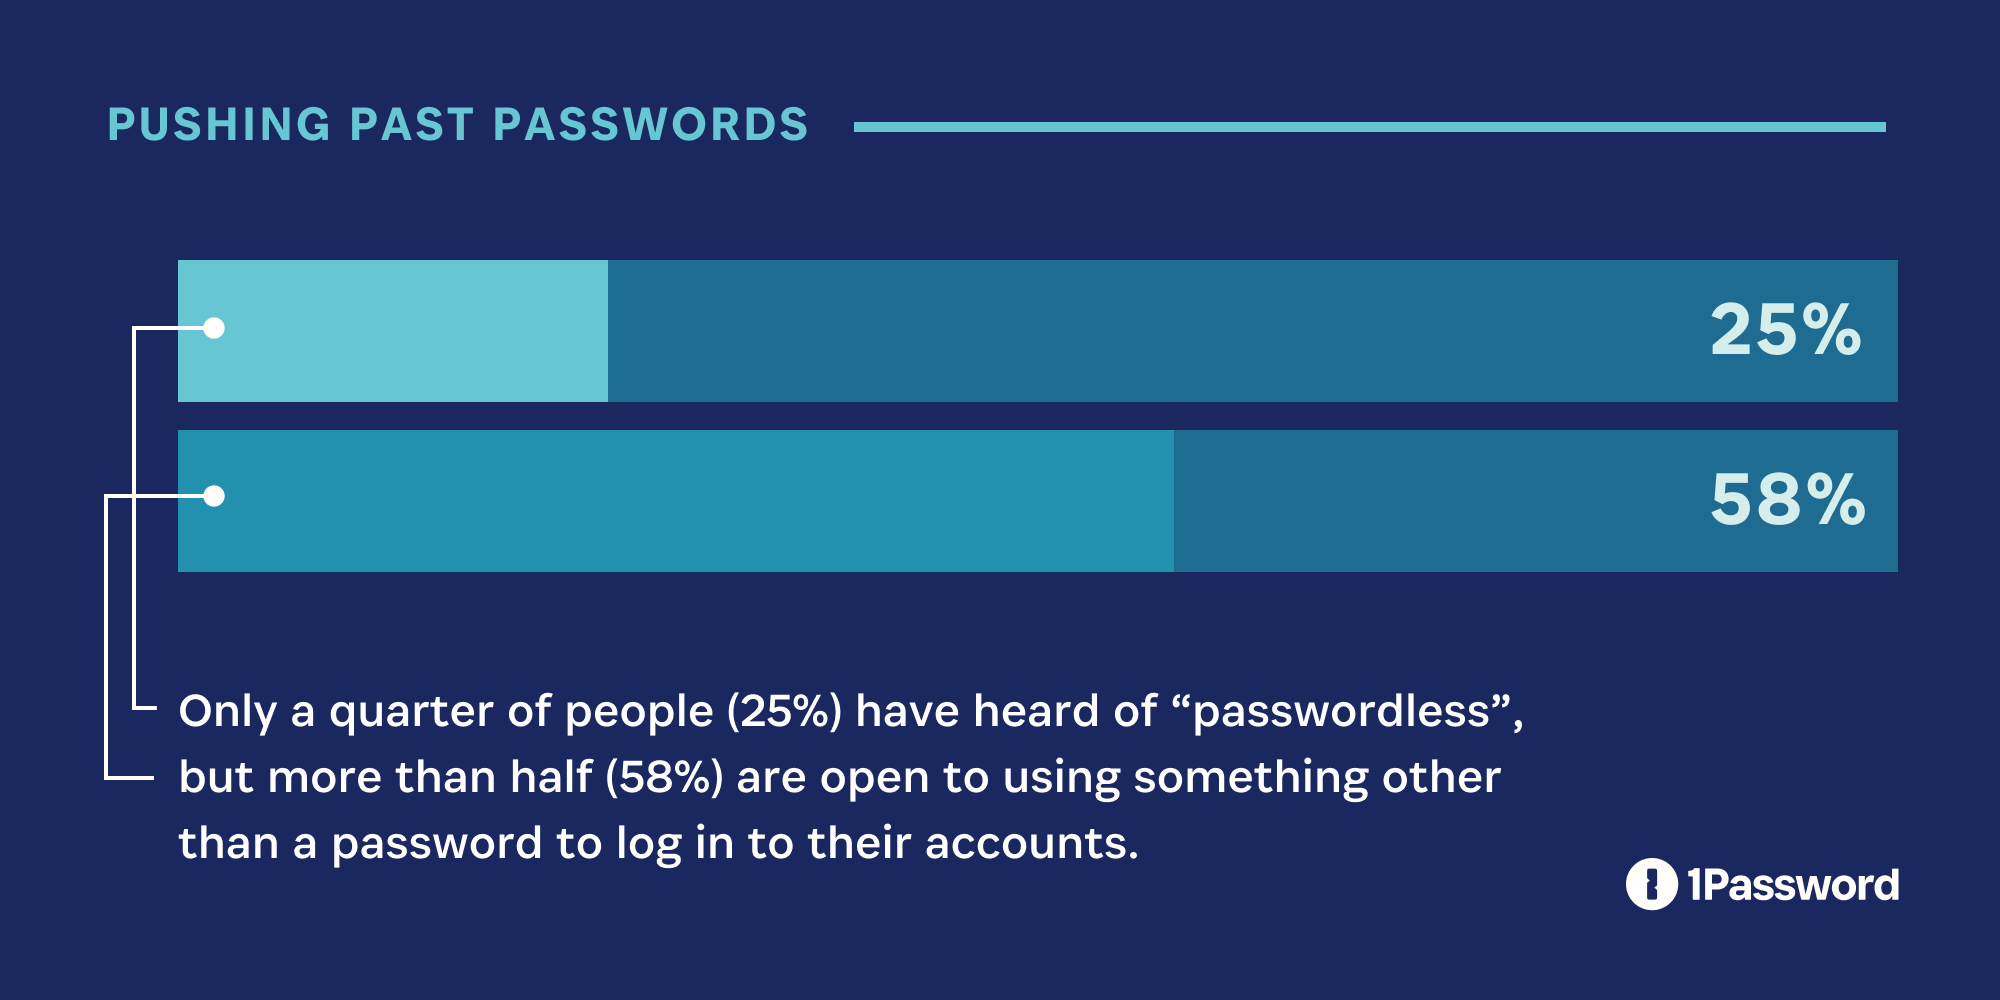 A bar graph showing that only a quarter of people (25%) have heard of 'passwordless,' but more than half (58%) are open to using something other than a password to log into their accounts.